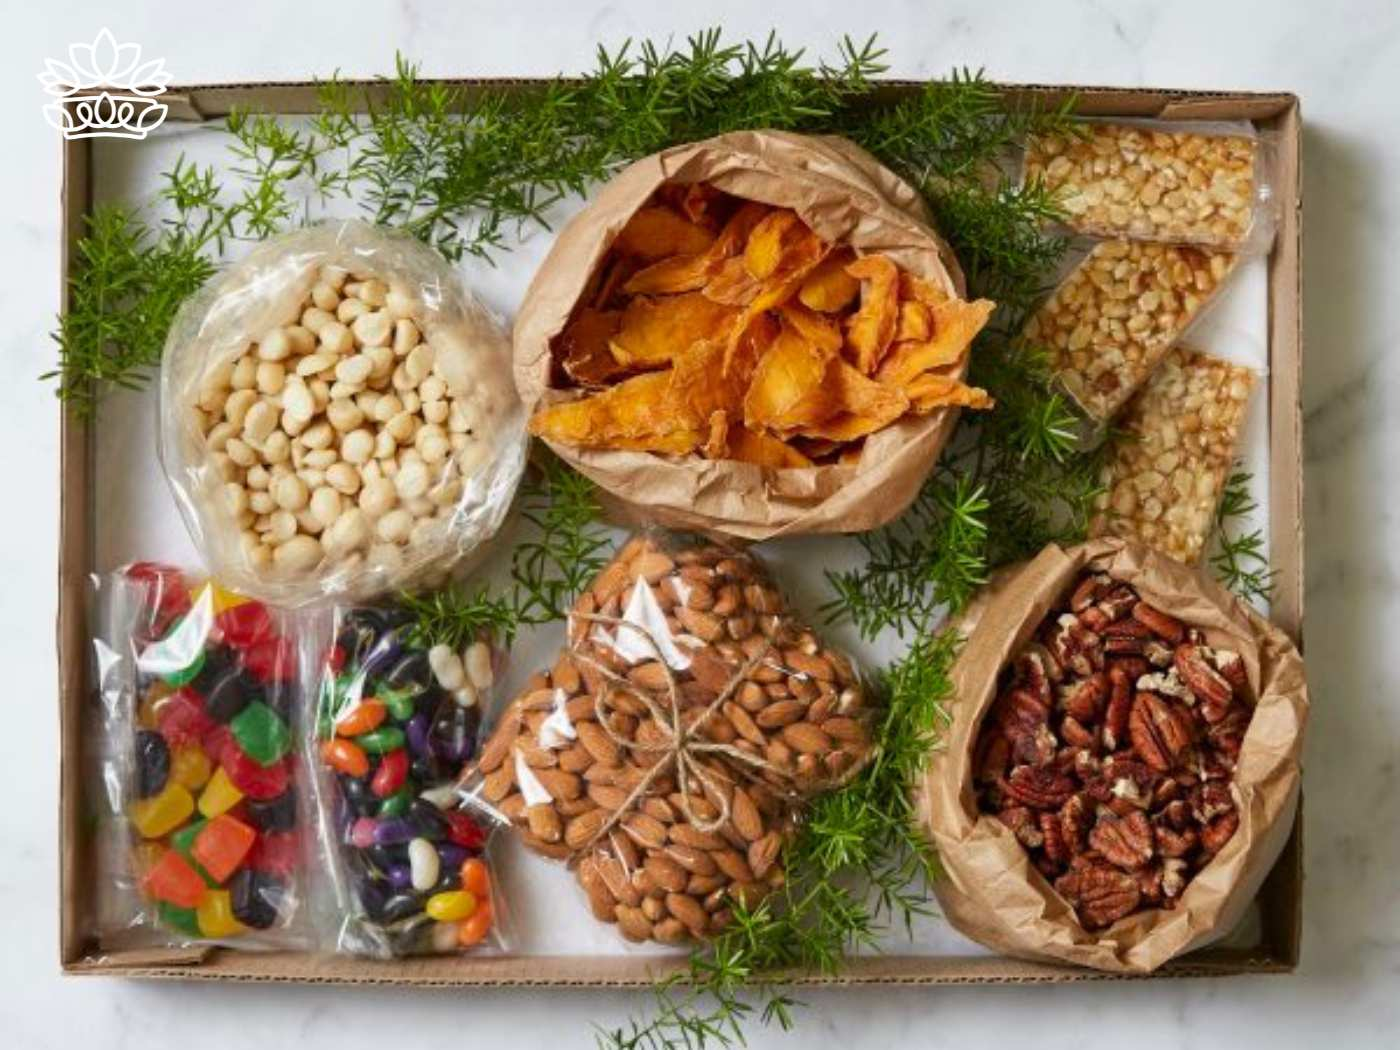 A selection of snacks, including dried mango slices, macadamia nuts, almonds, pecans, jelly beans, and seed bars, arranged in an eco-friendly box with greenery. Fabulous Flowers and Gifts. Gifts for Him. Delivered with Heart.